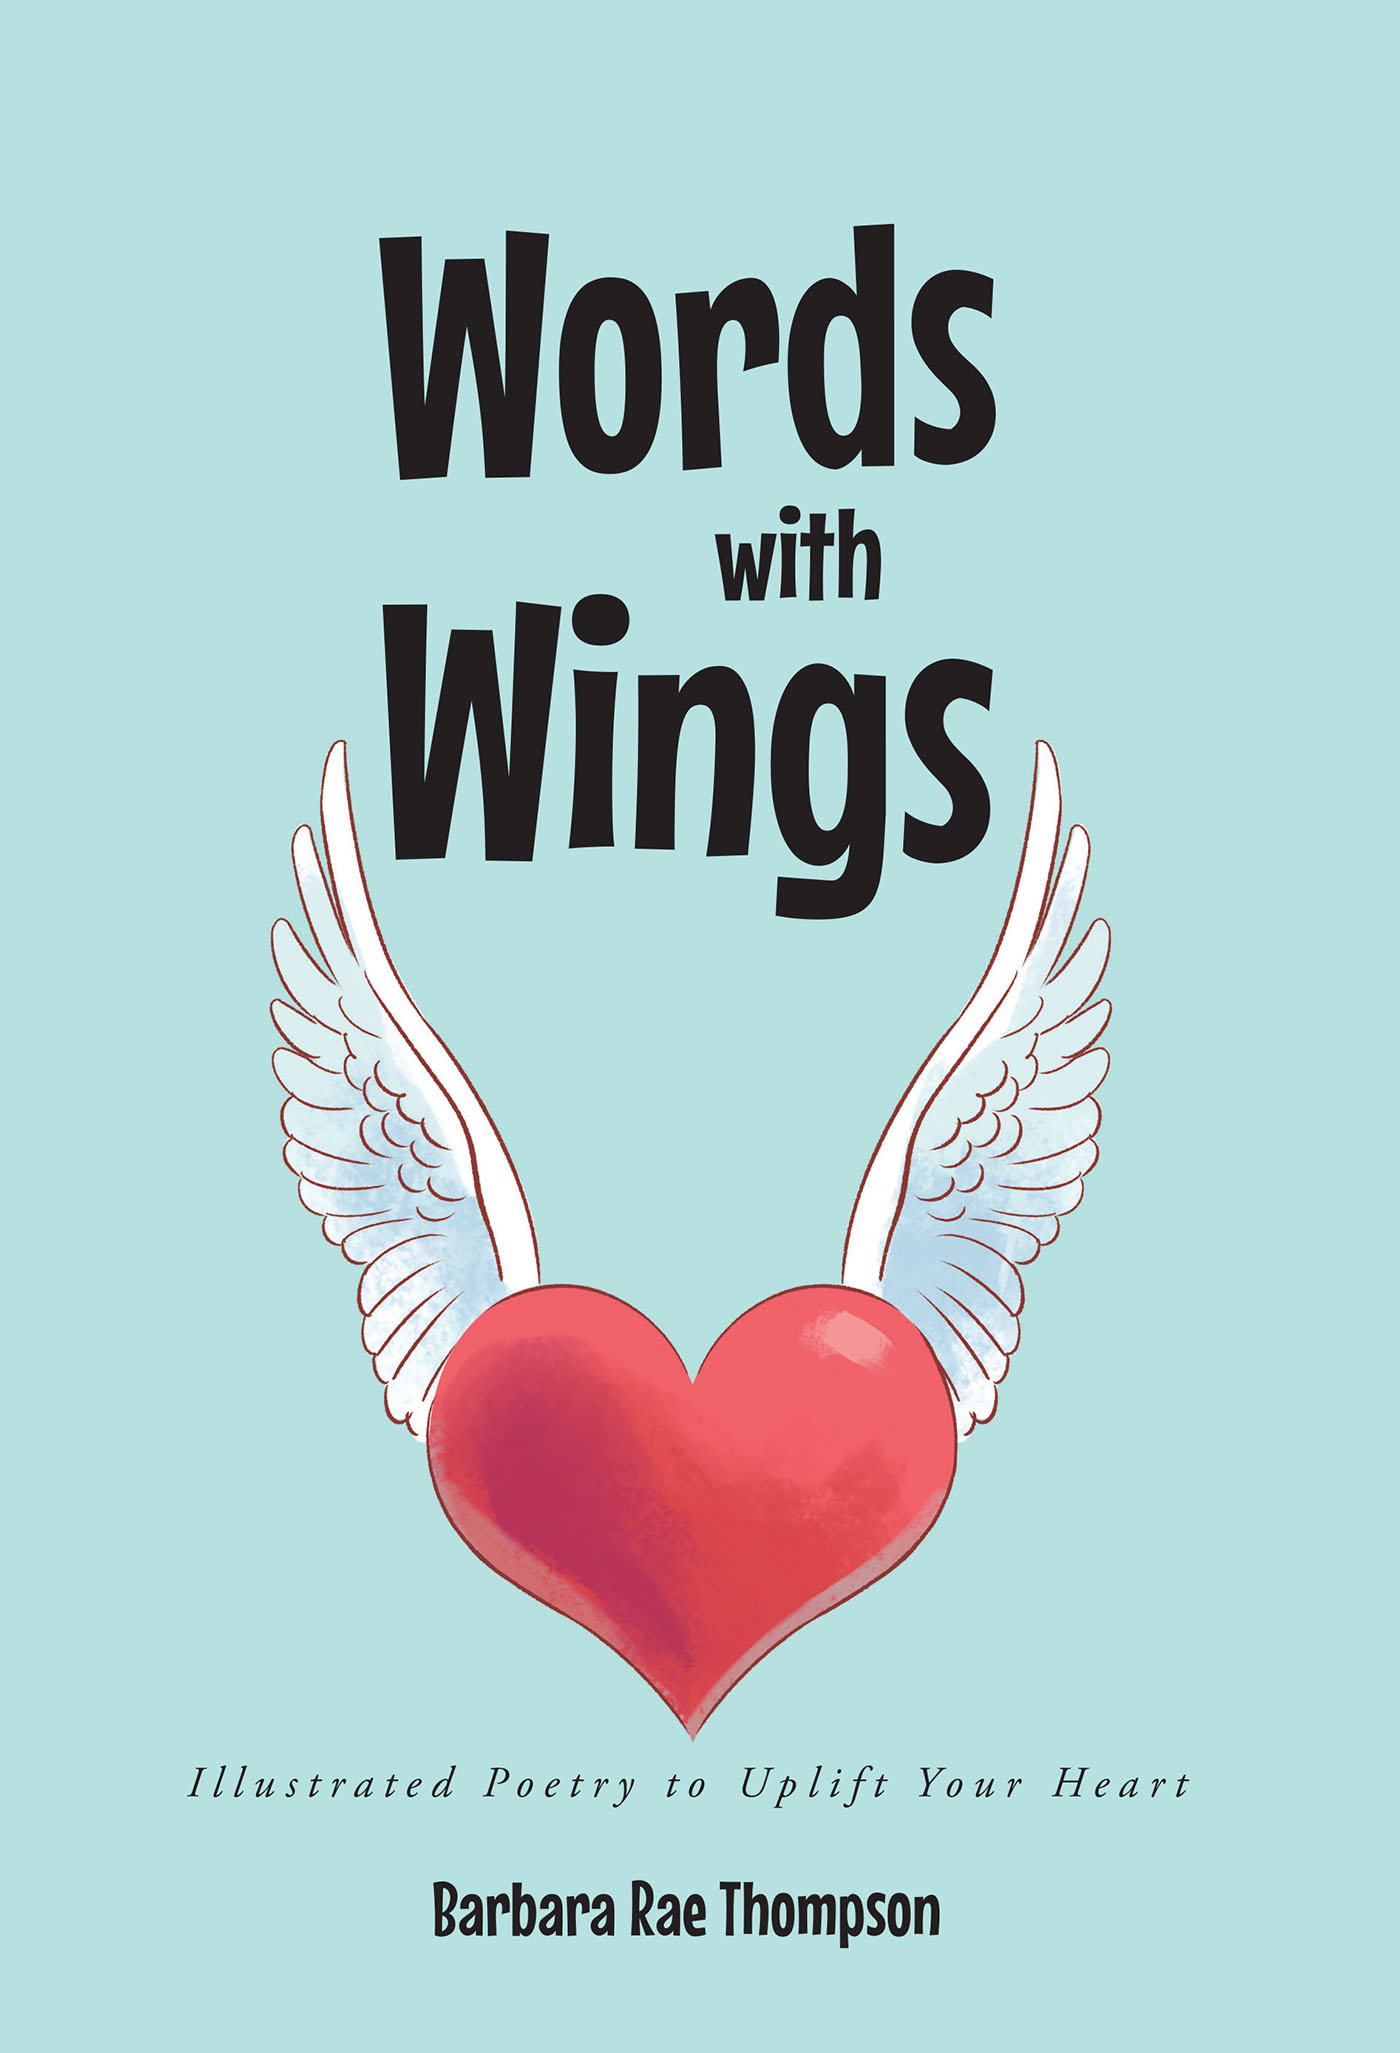 Barbara Rae Thompson’s Newly Released "Words with Wings: Illustrated Poetry to Uplift Your Heart" is a Heartfelt Collection of Inspiring Poetry